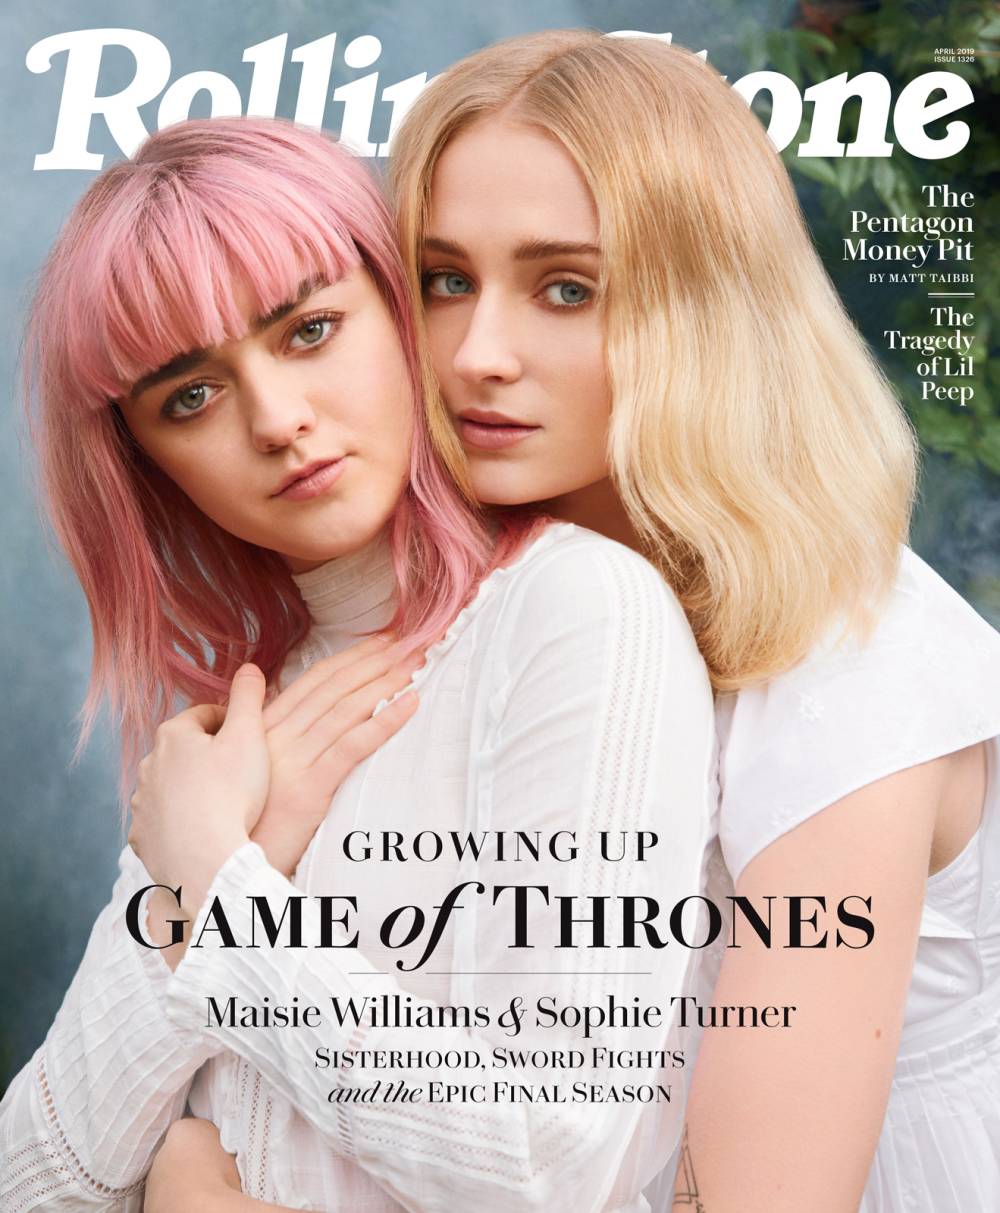 Sophie Turner Didn't Think She'd Get Engaged This Young, Talks Experimenting with Her Sexuality: 'I love a soul, not a gender.”